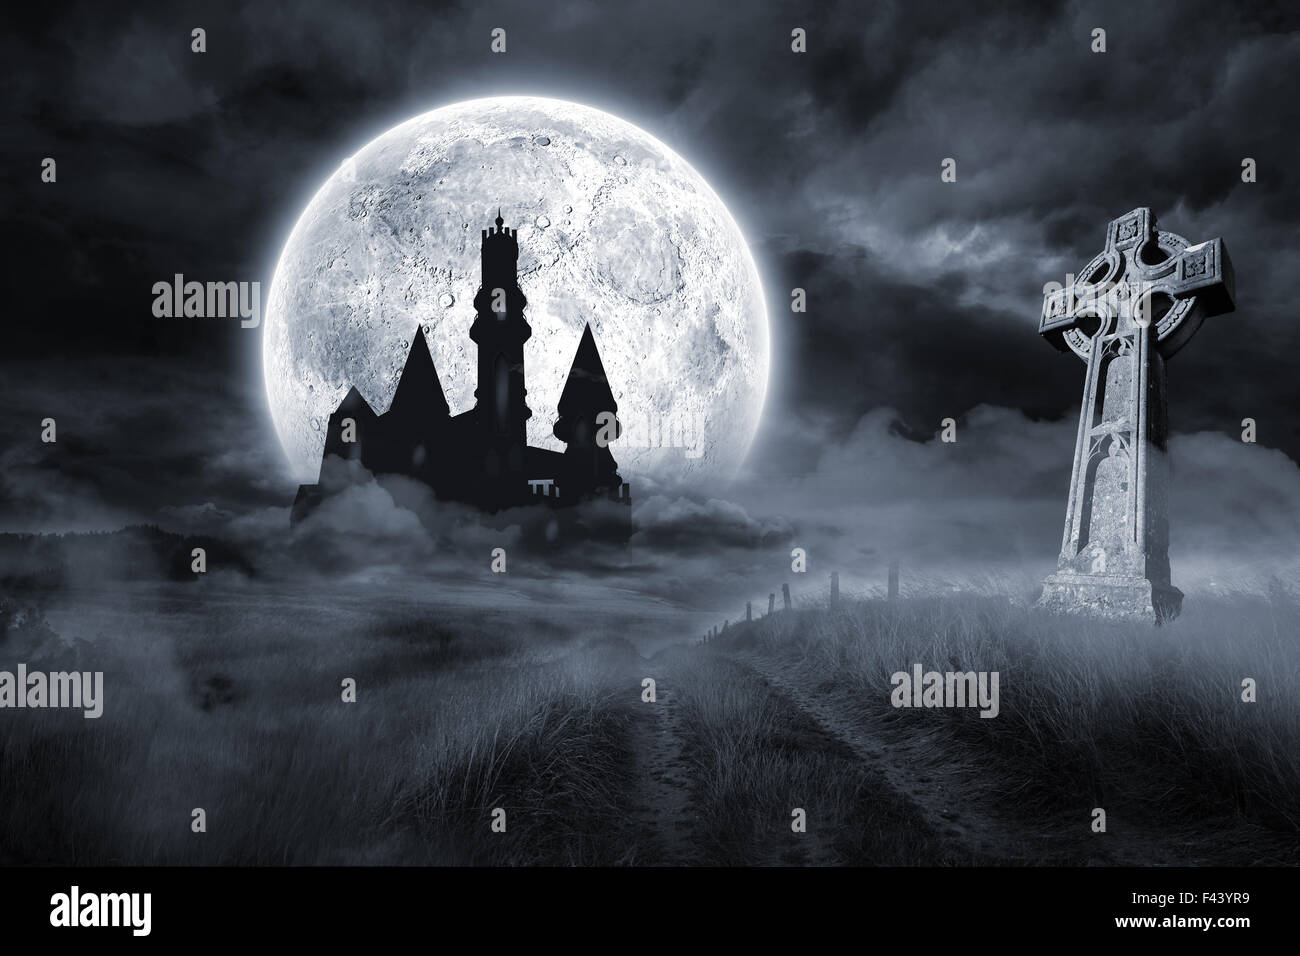 Castle and grave under full moon Stock Photo